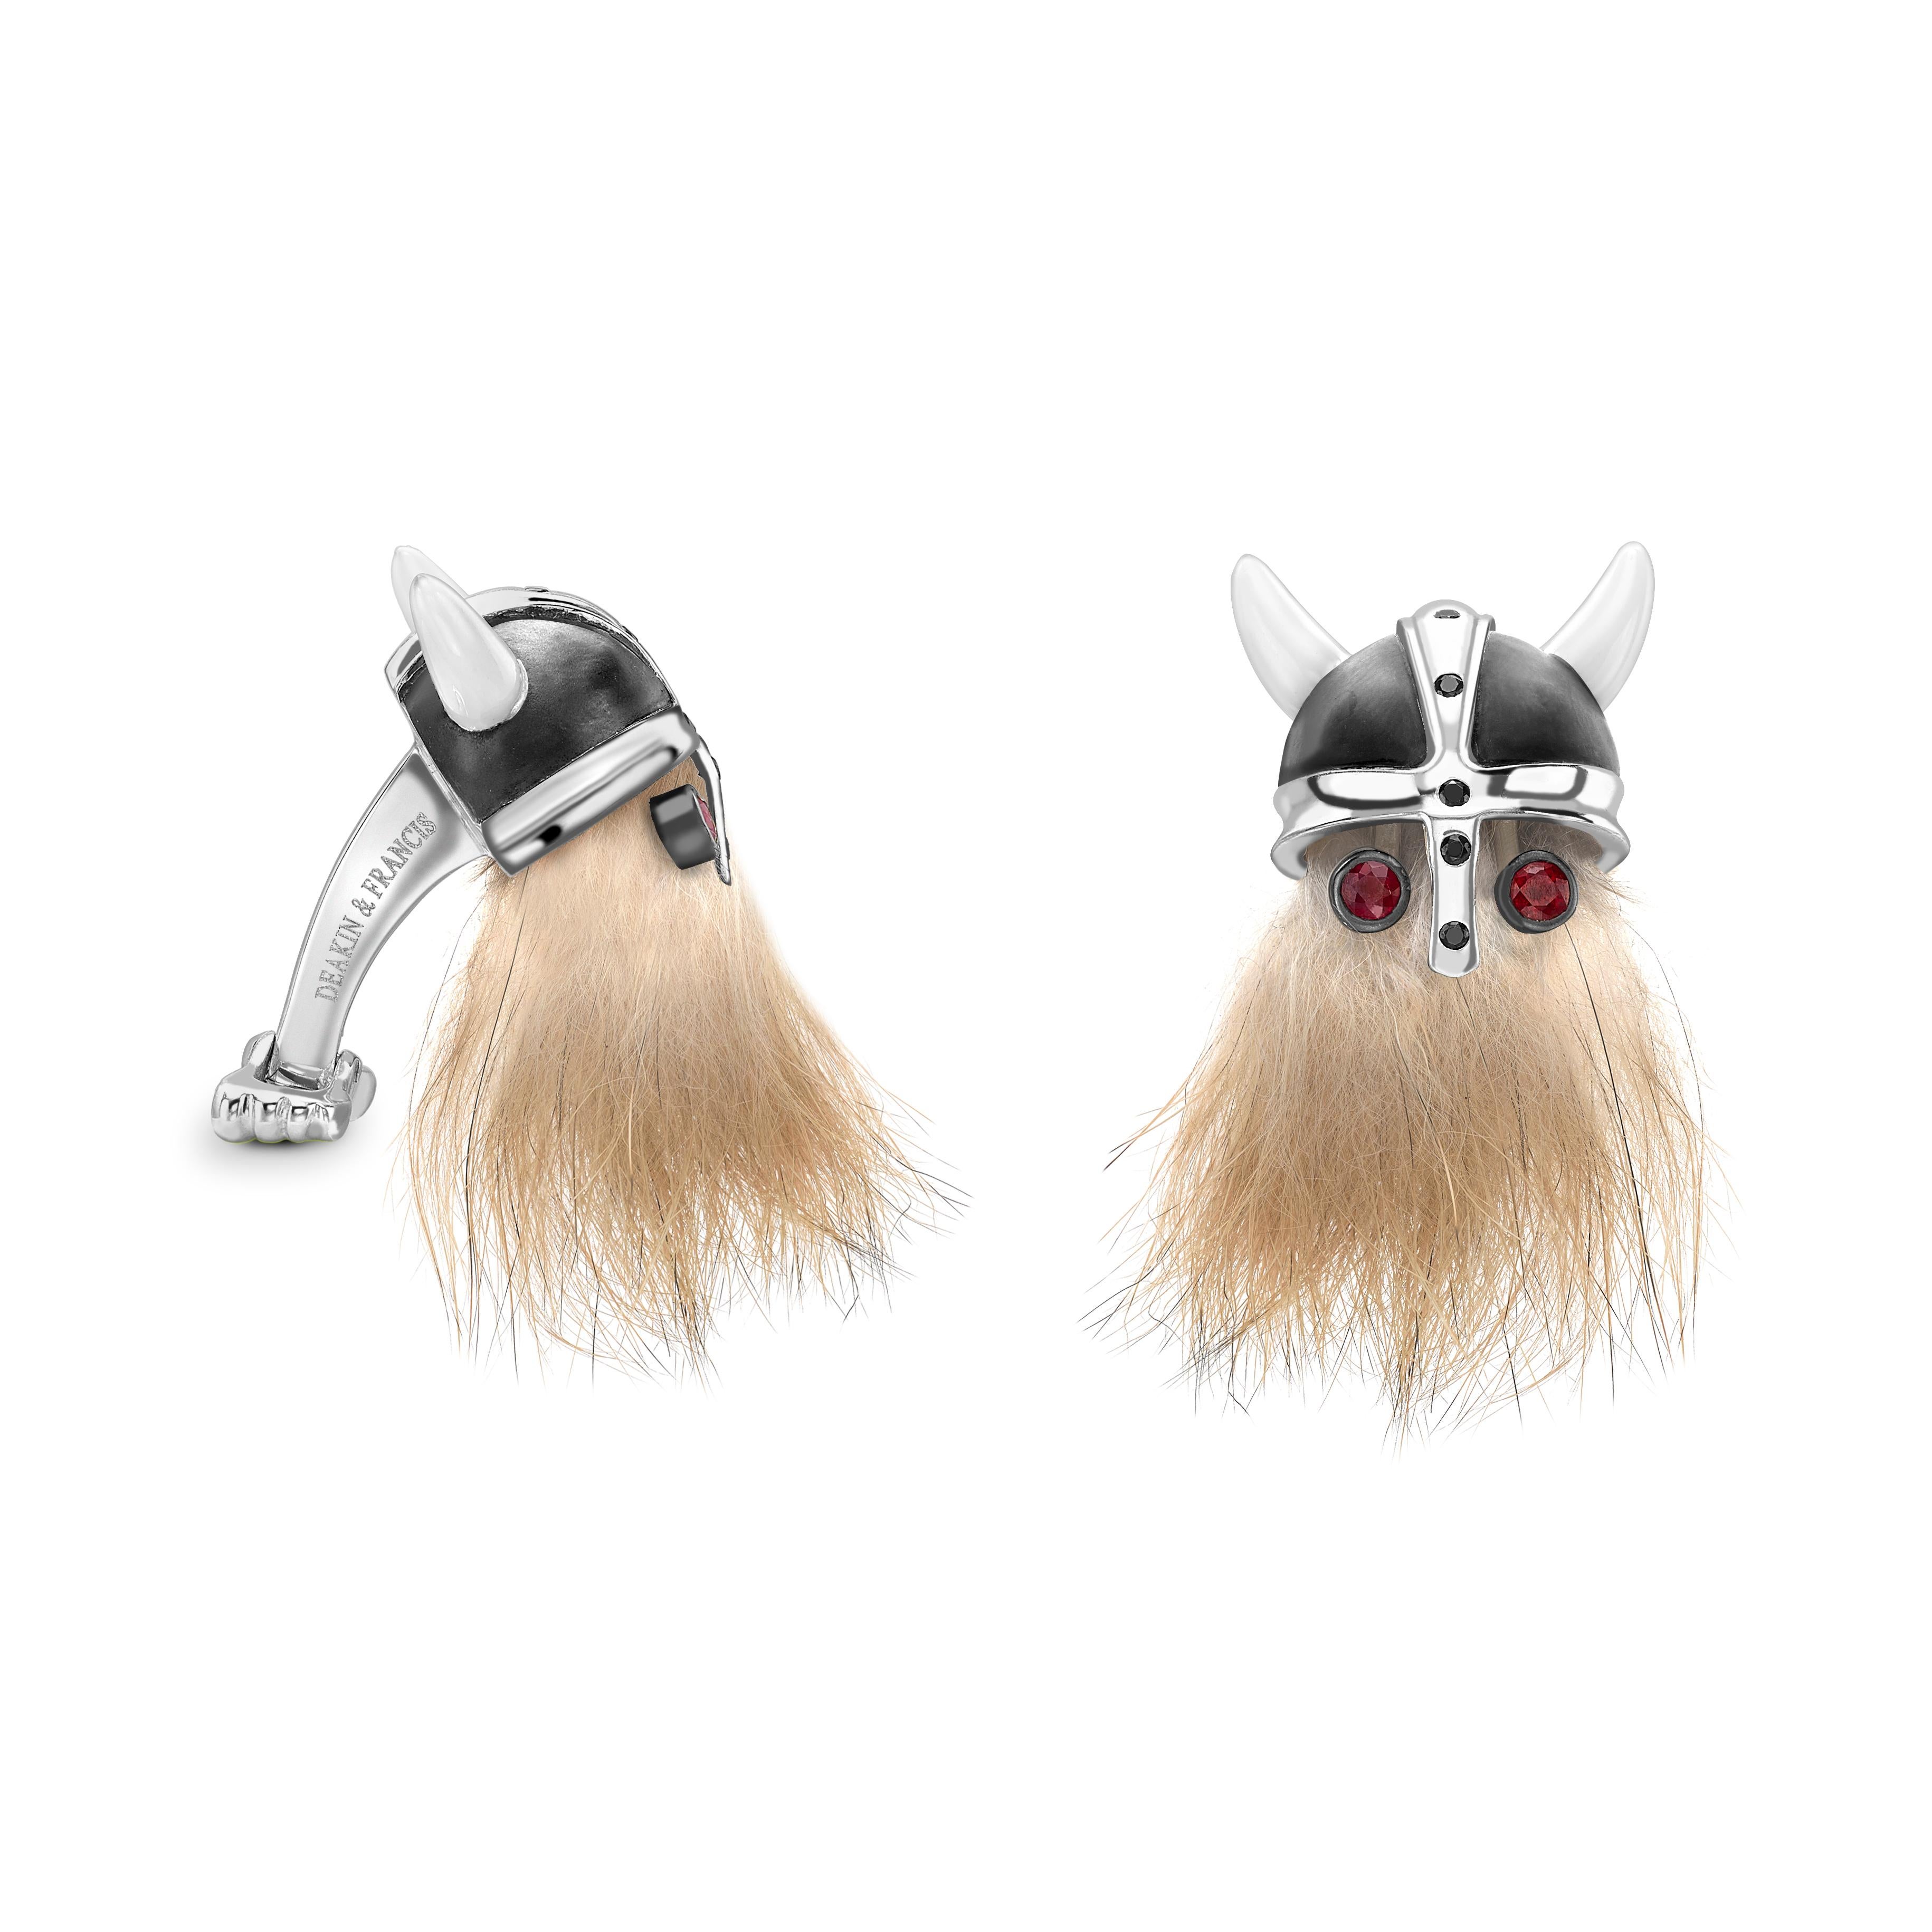 DEAKIN & FRANCIS, Piccadilly Arcade, London

Inspired by Scandinavian Pirates, these Viking Skull cufflinks feature a black helmet with ruby eyes skilfully fitted into a beard. Let your wild side stand out!
This Viking Skull design has a black